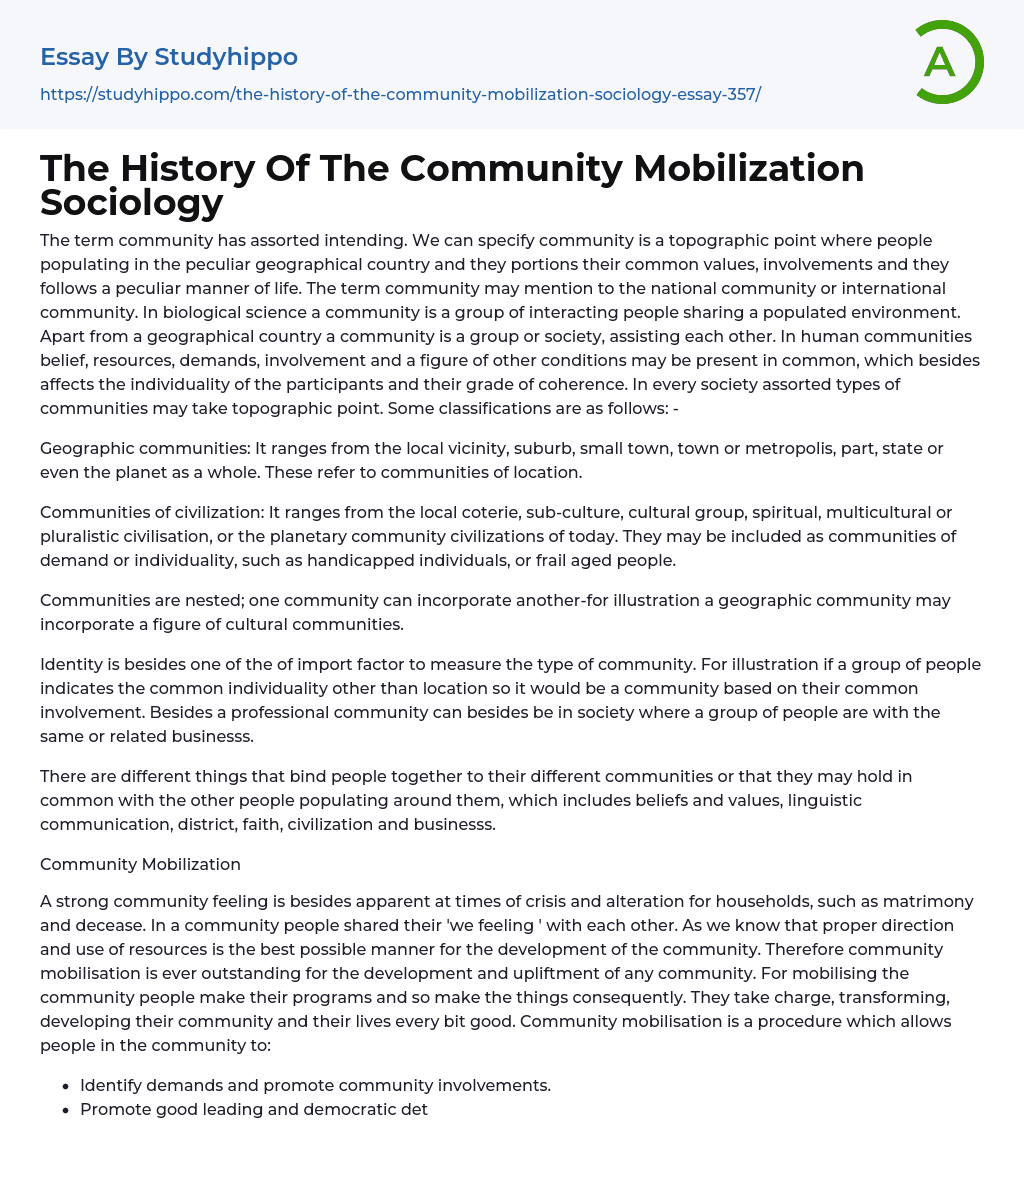 The History Of The Community Mobilization Sociology